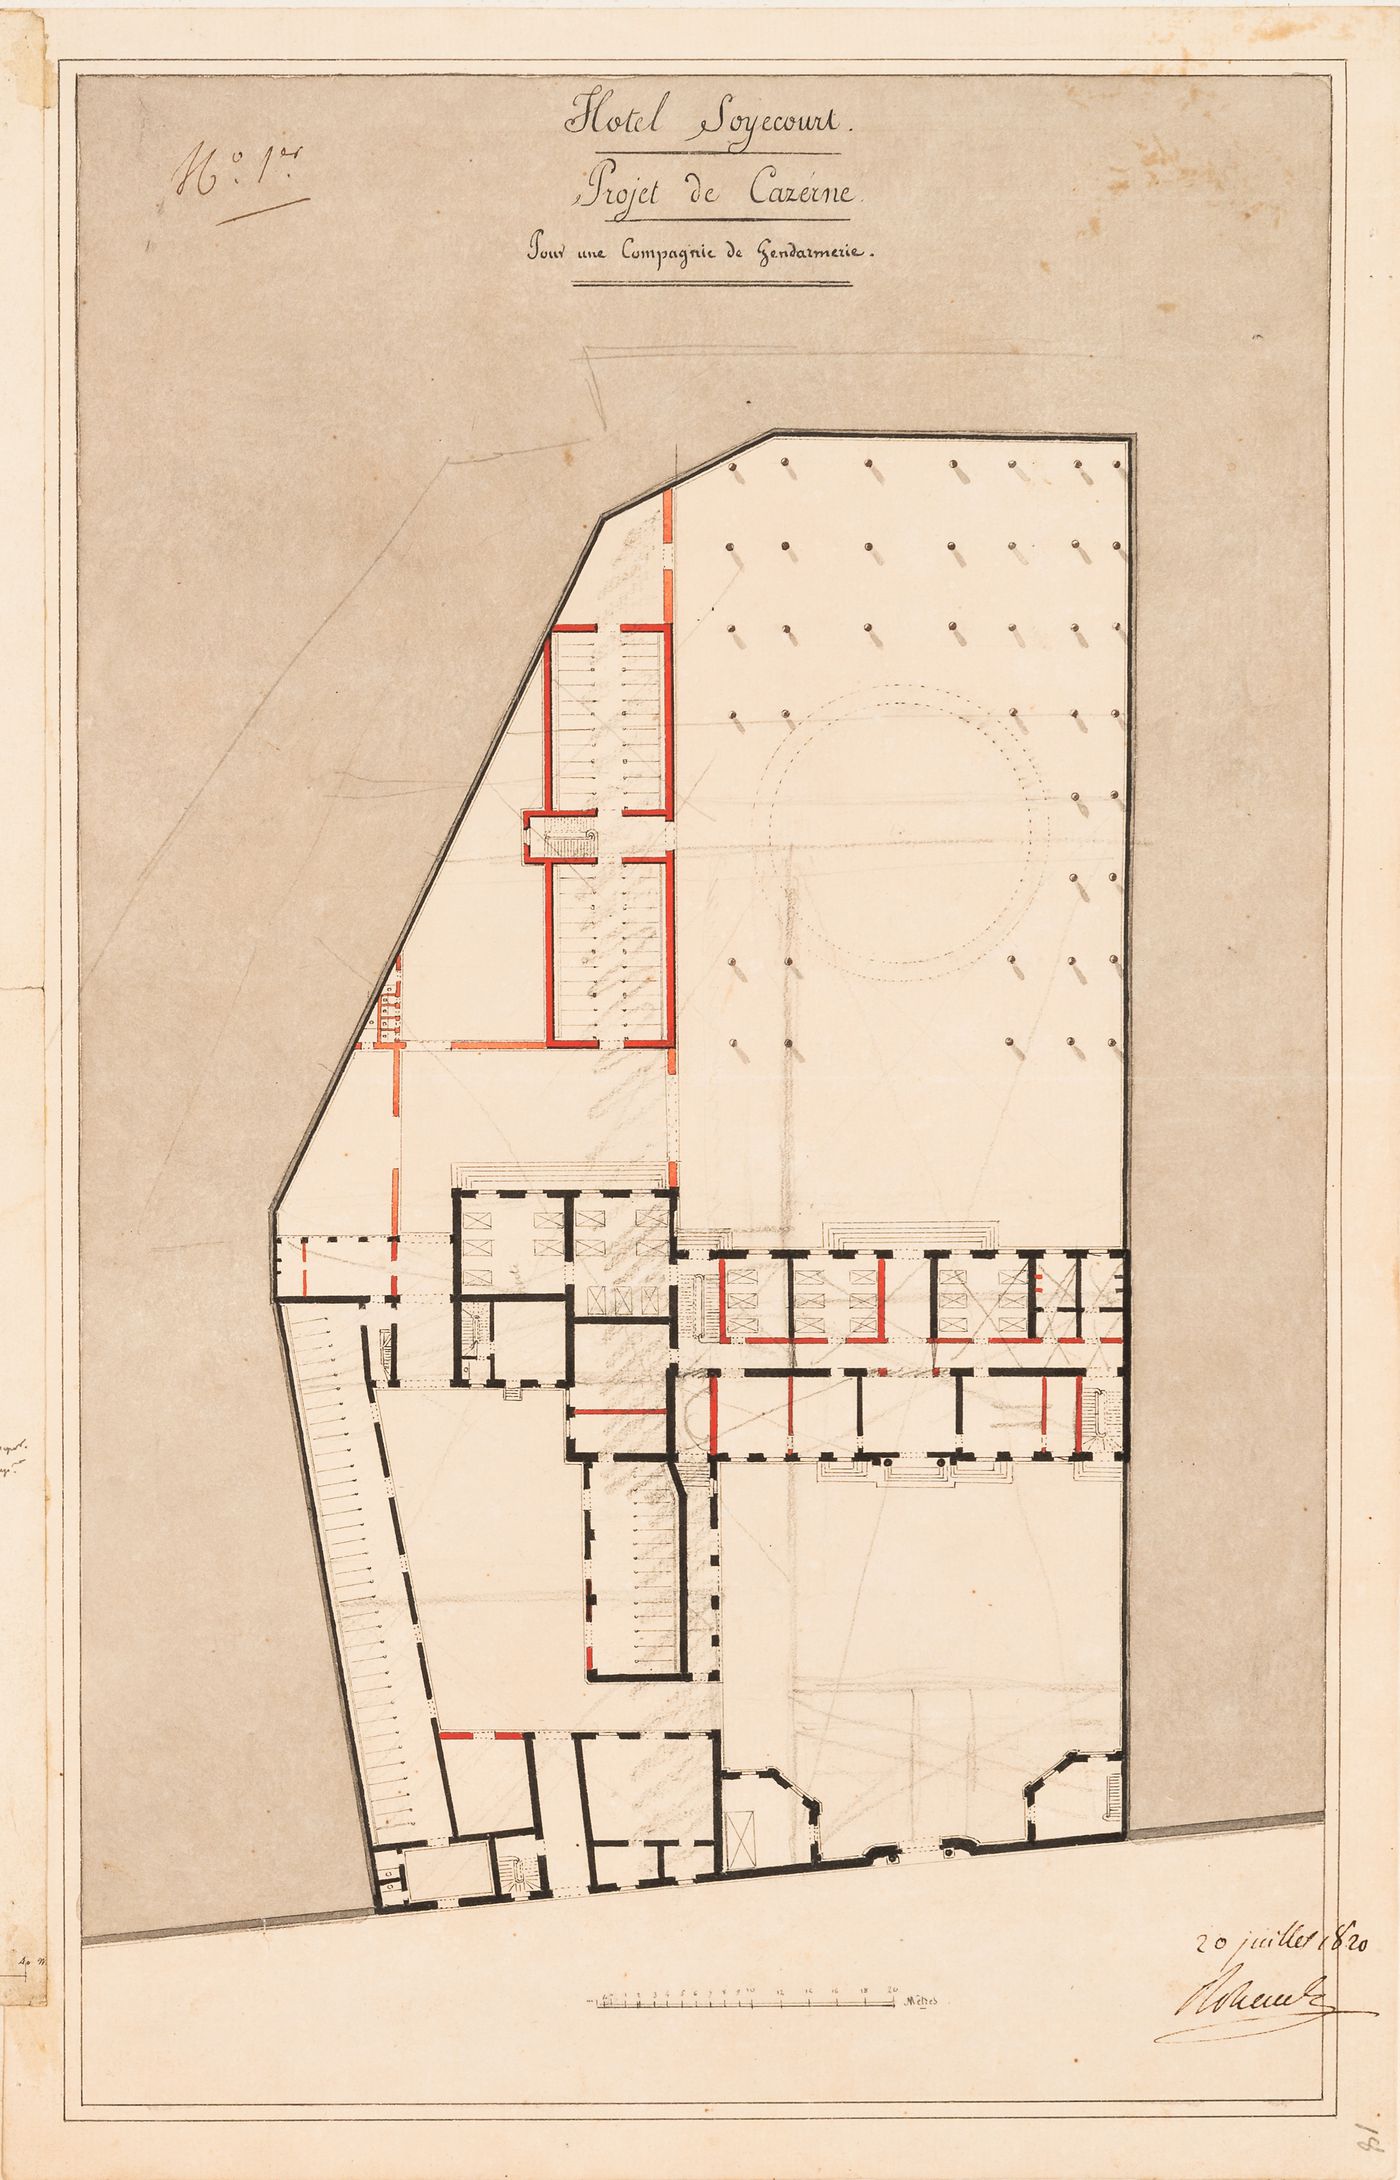 Project for the conversion of Hôtel Soyécourt, Paris, into barracks to house a company of gendarmes: Ground floor plan